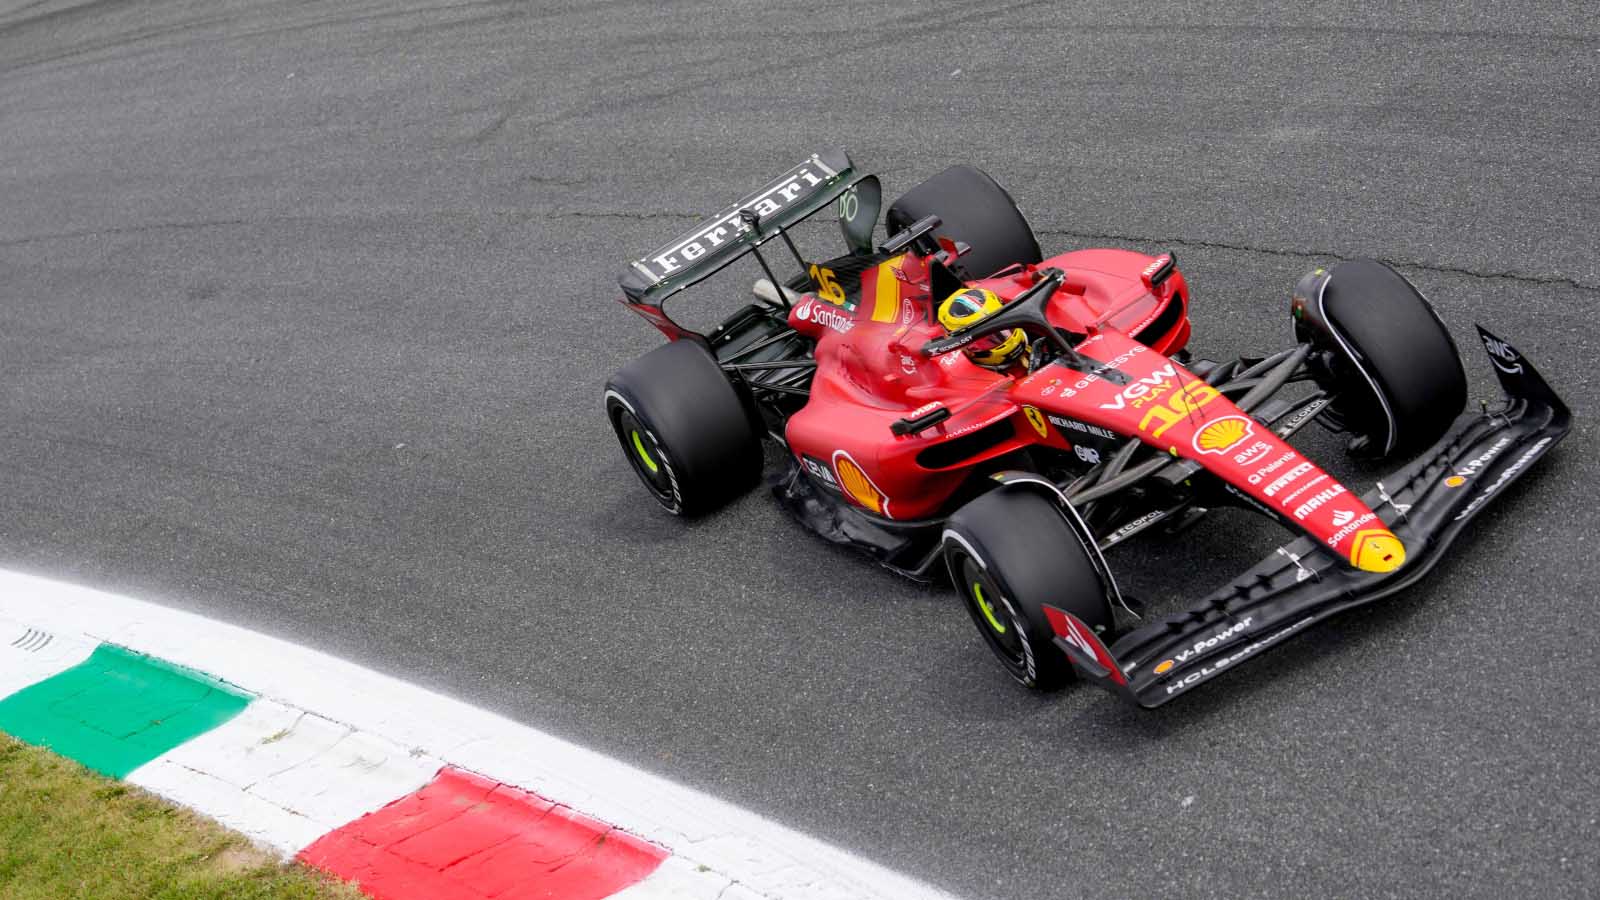 Charles Leclerc runs the updated Ferrari livery at Monza. F1 results